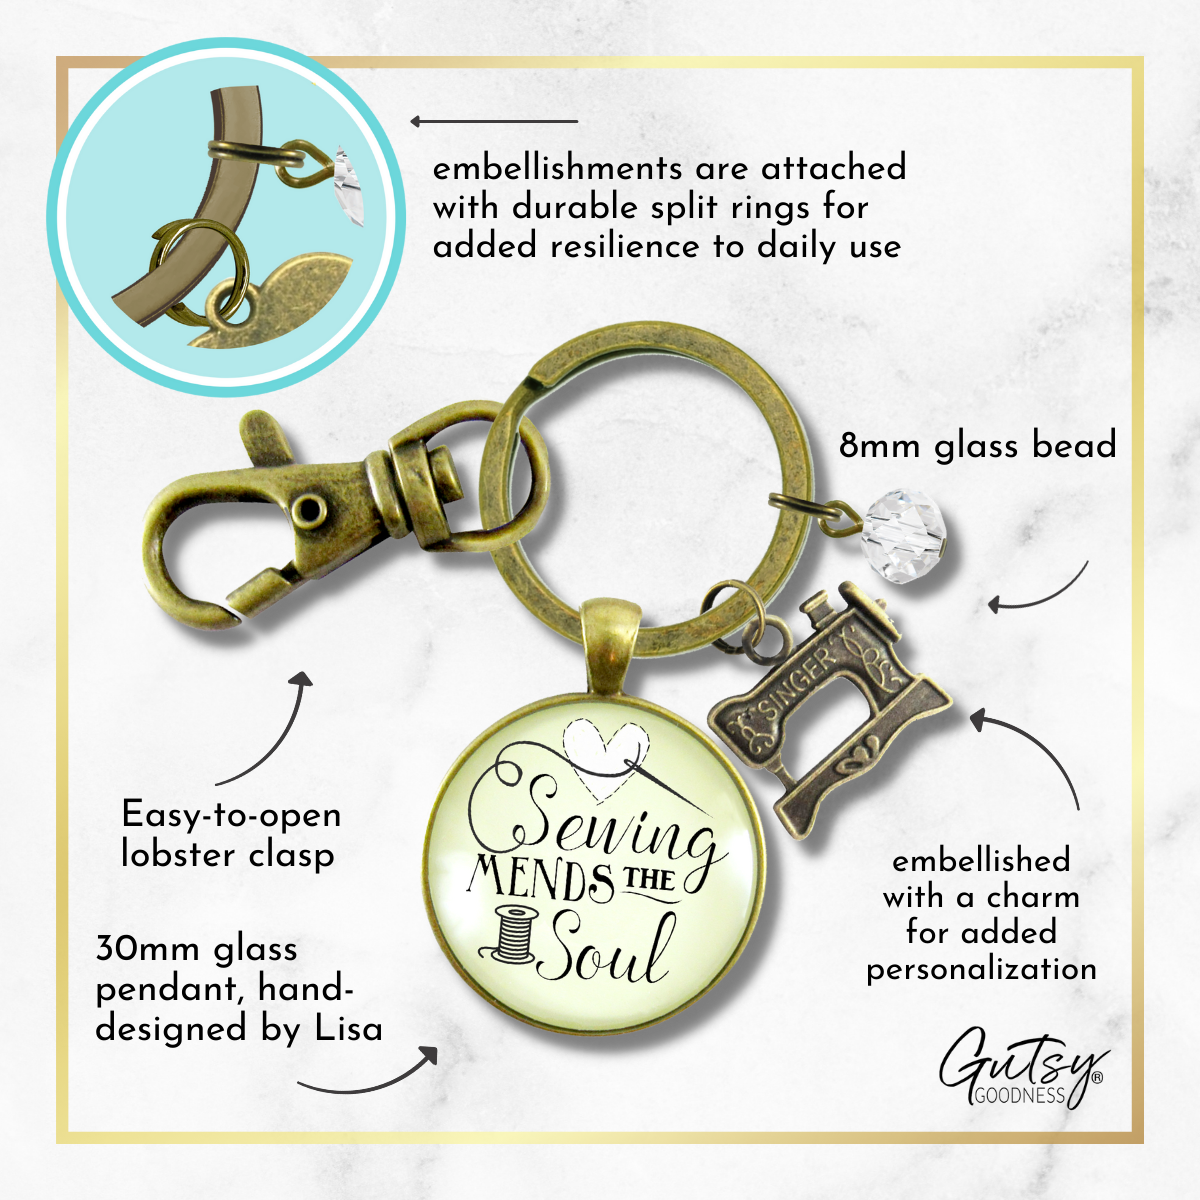 Sewing Keychain Mends the Soul Seamstress Key Ring Bronze Jewelry Machine Charm - Gutsy Goodness Handmade Jewelry;Sewing Keychain Mends The Soul Seamstress Key Ring Bronze Jewelry Machine Charm - Gutsy Goodness Handmade Jewelry Gifts